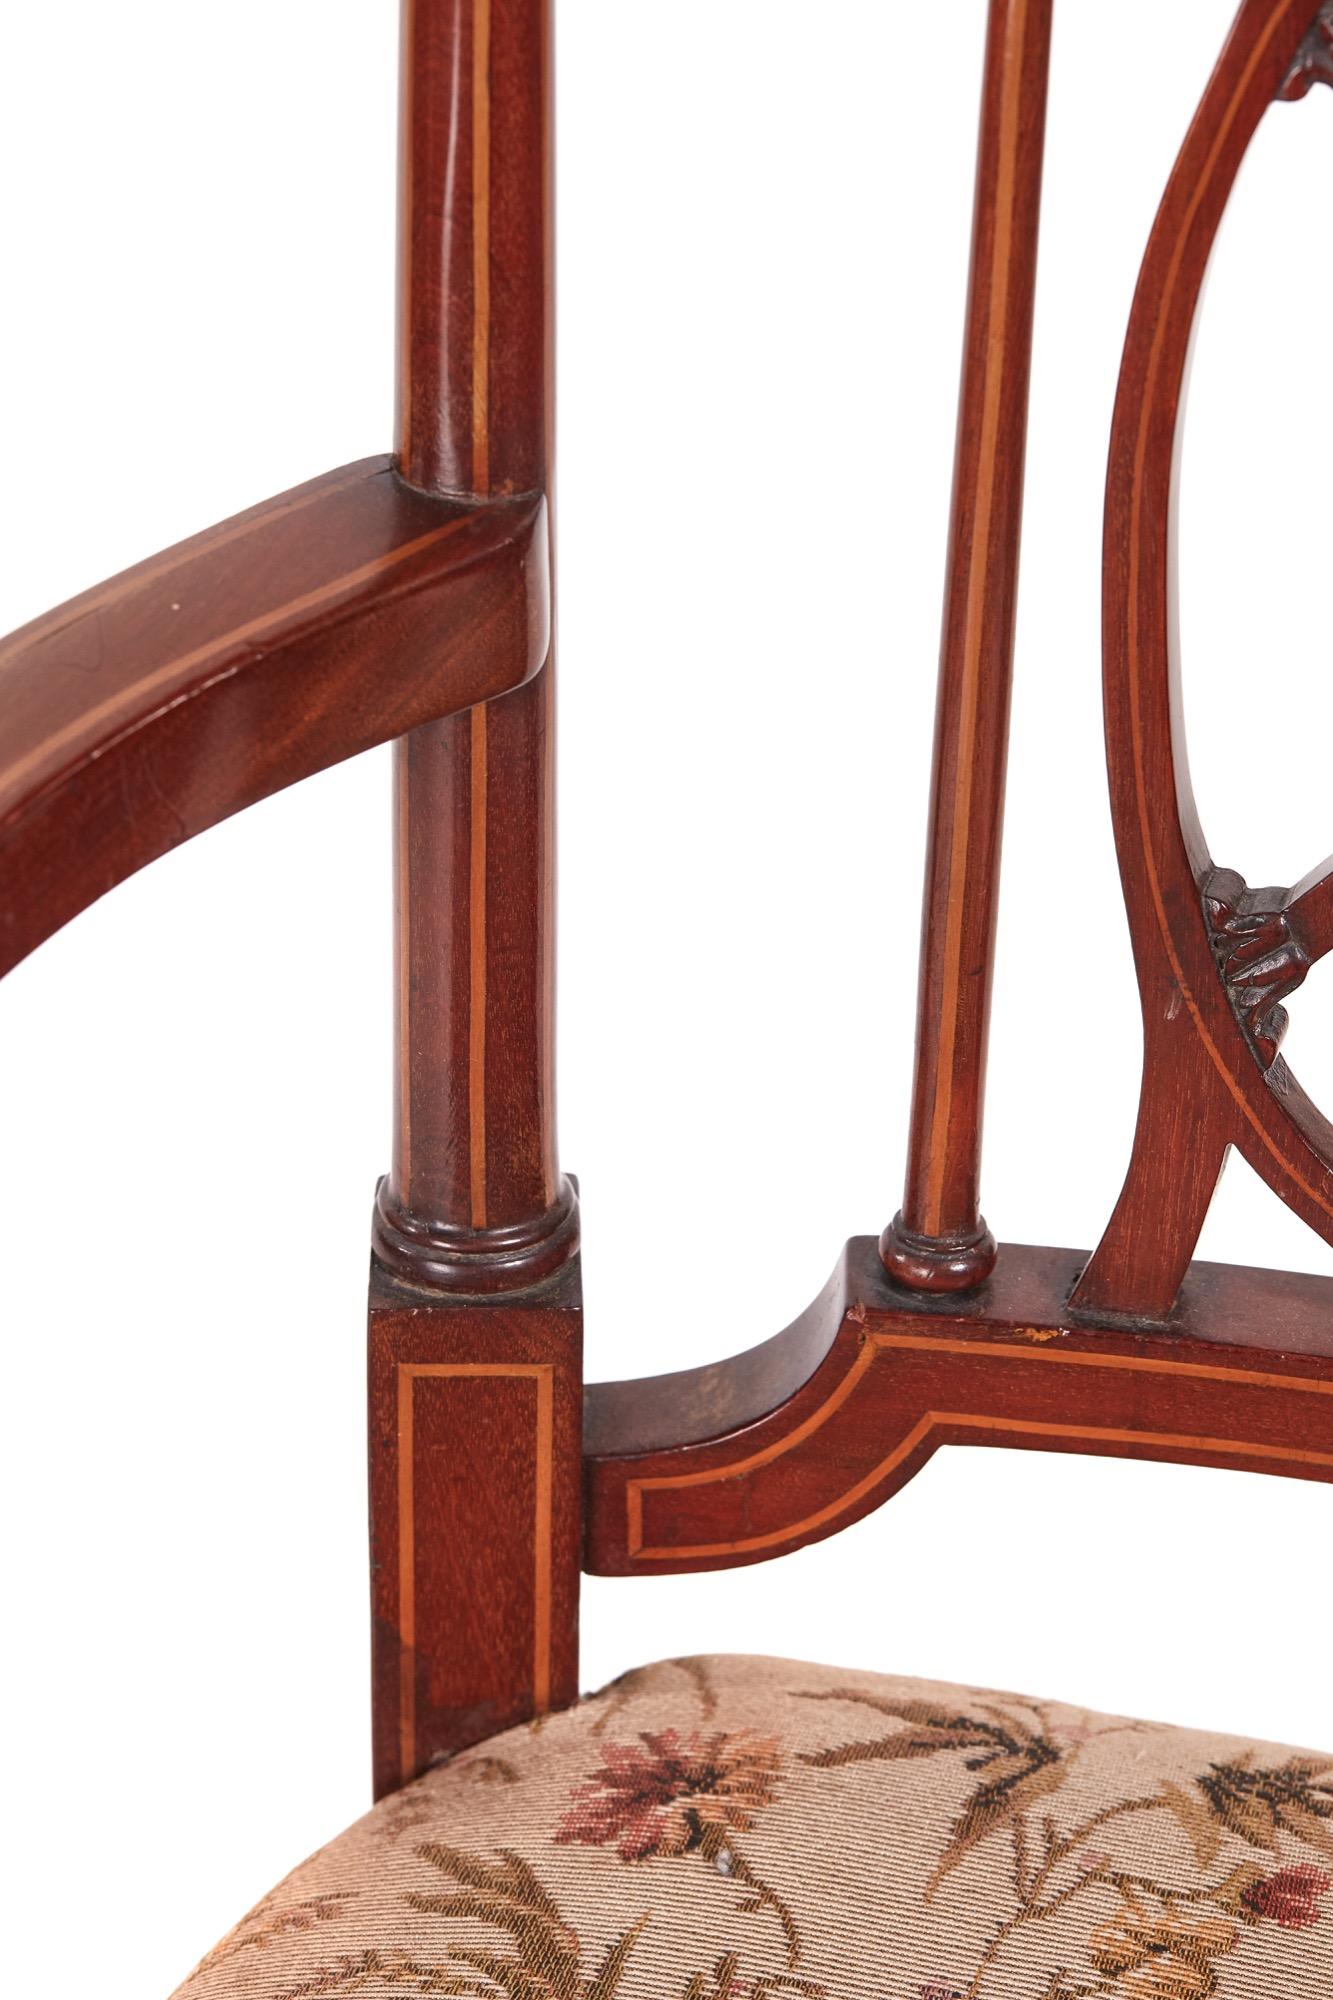 Other Quality Pair of Antique Mahogany Inlaid Arm or Desk Chairs